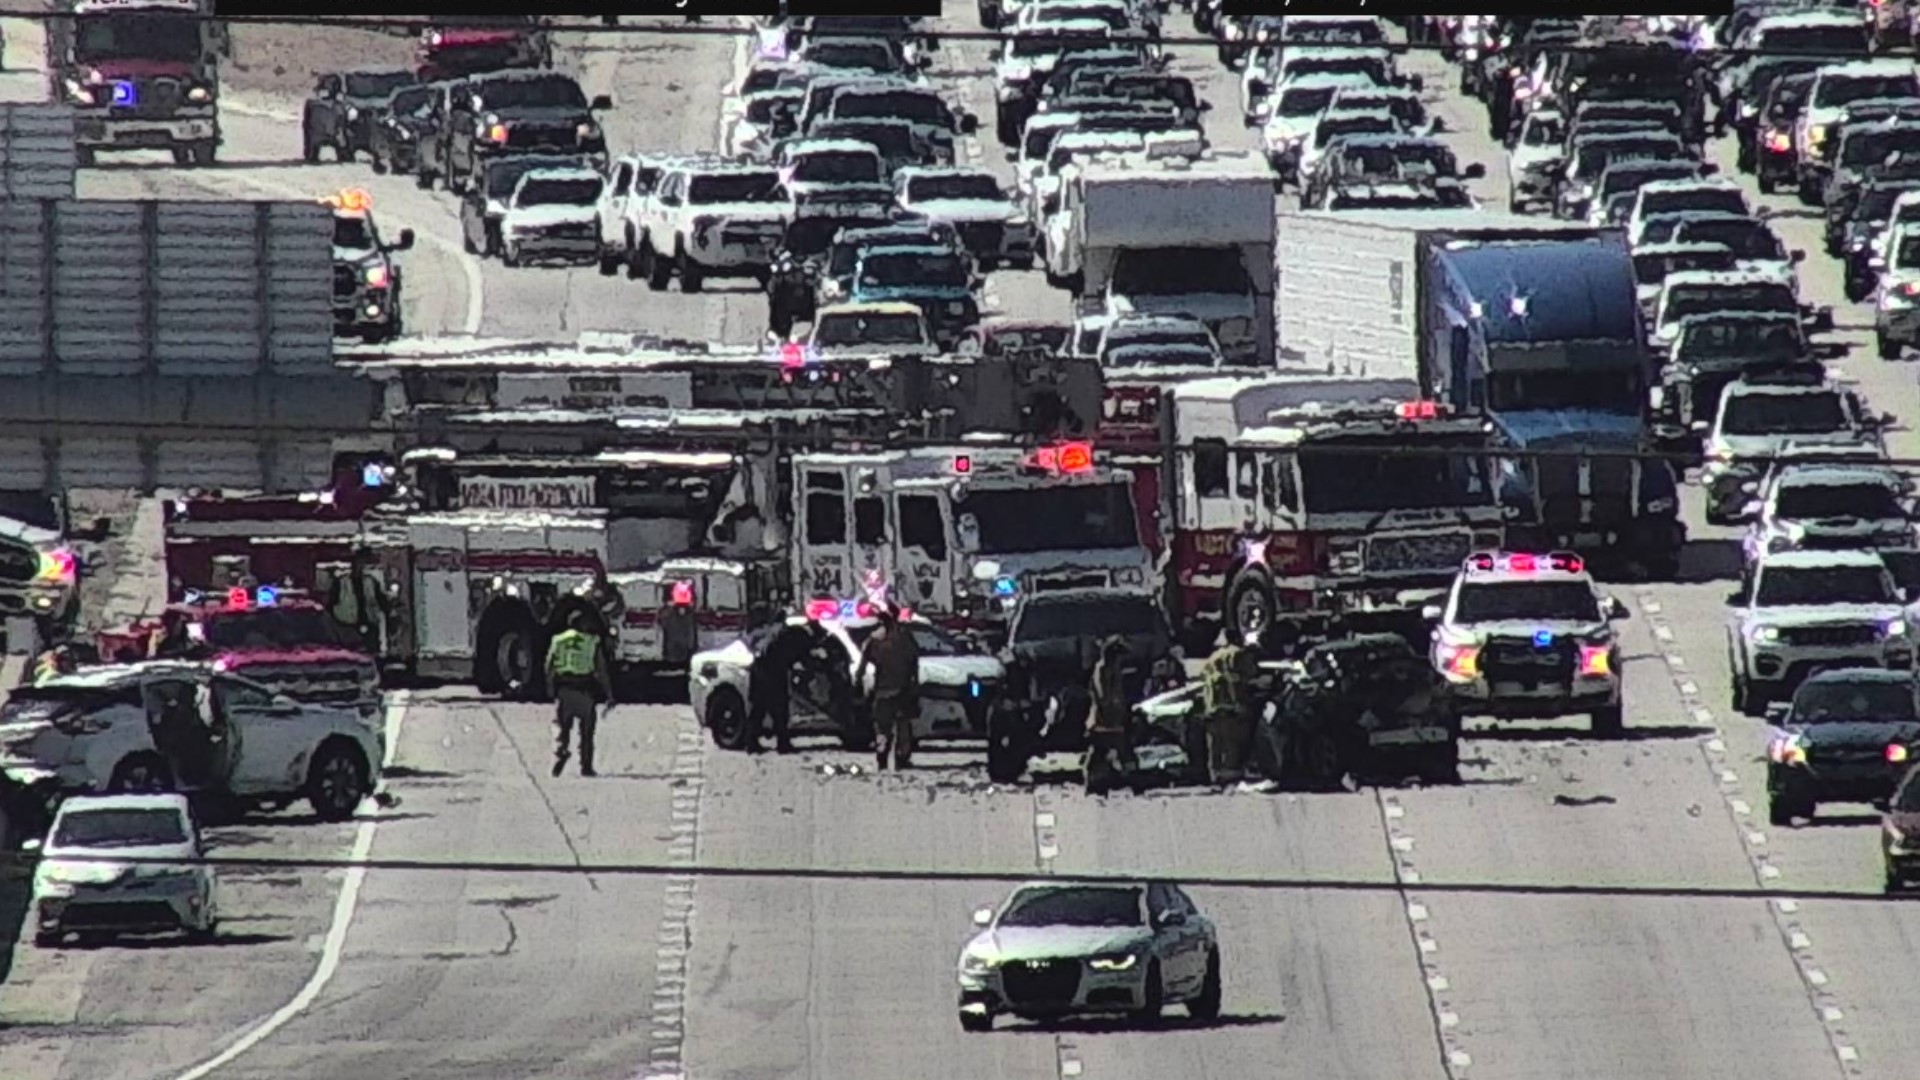 A crash on the Loop 101 near Southern Avenue in Tempe caused an injury to one person and a major traffic headache for many others. Here are the latest details.